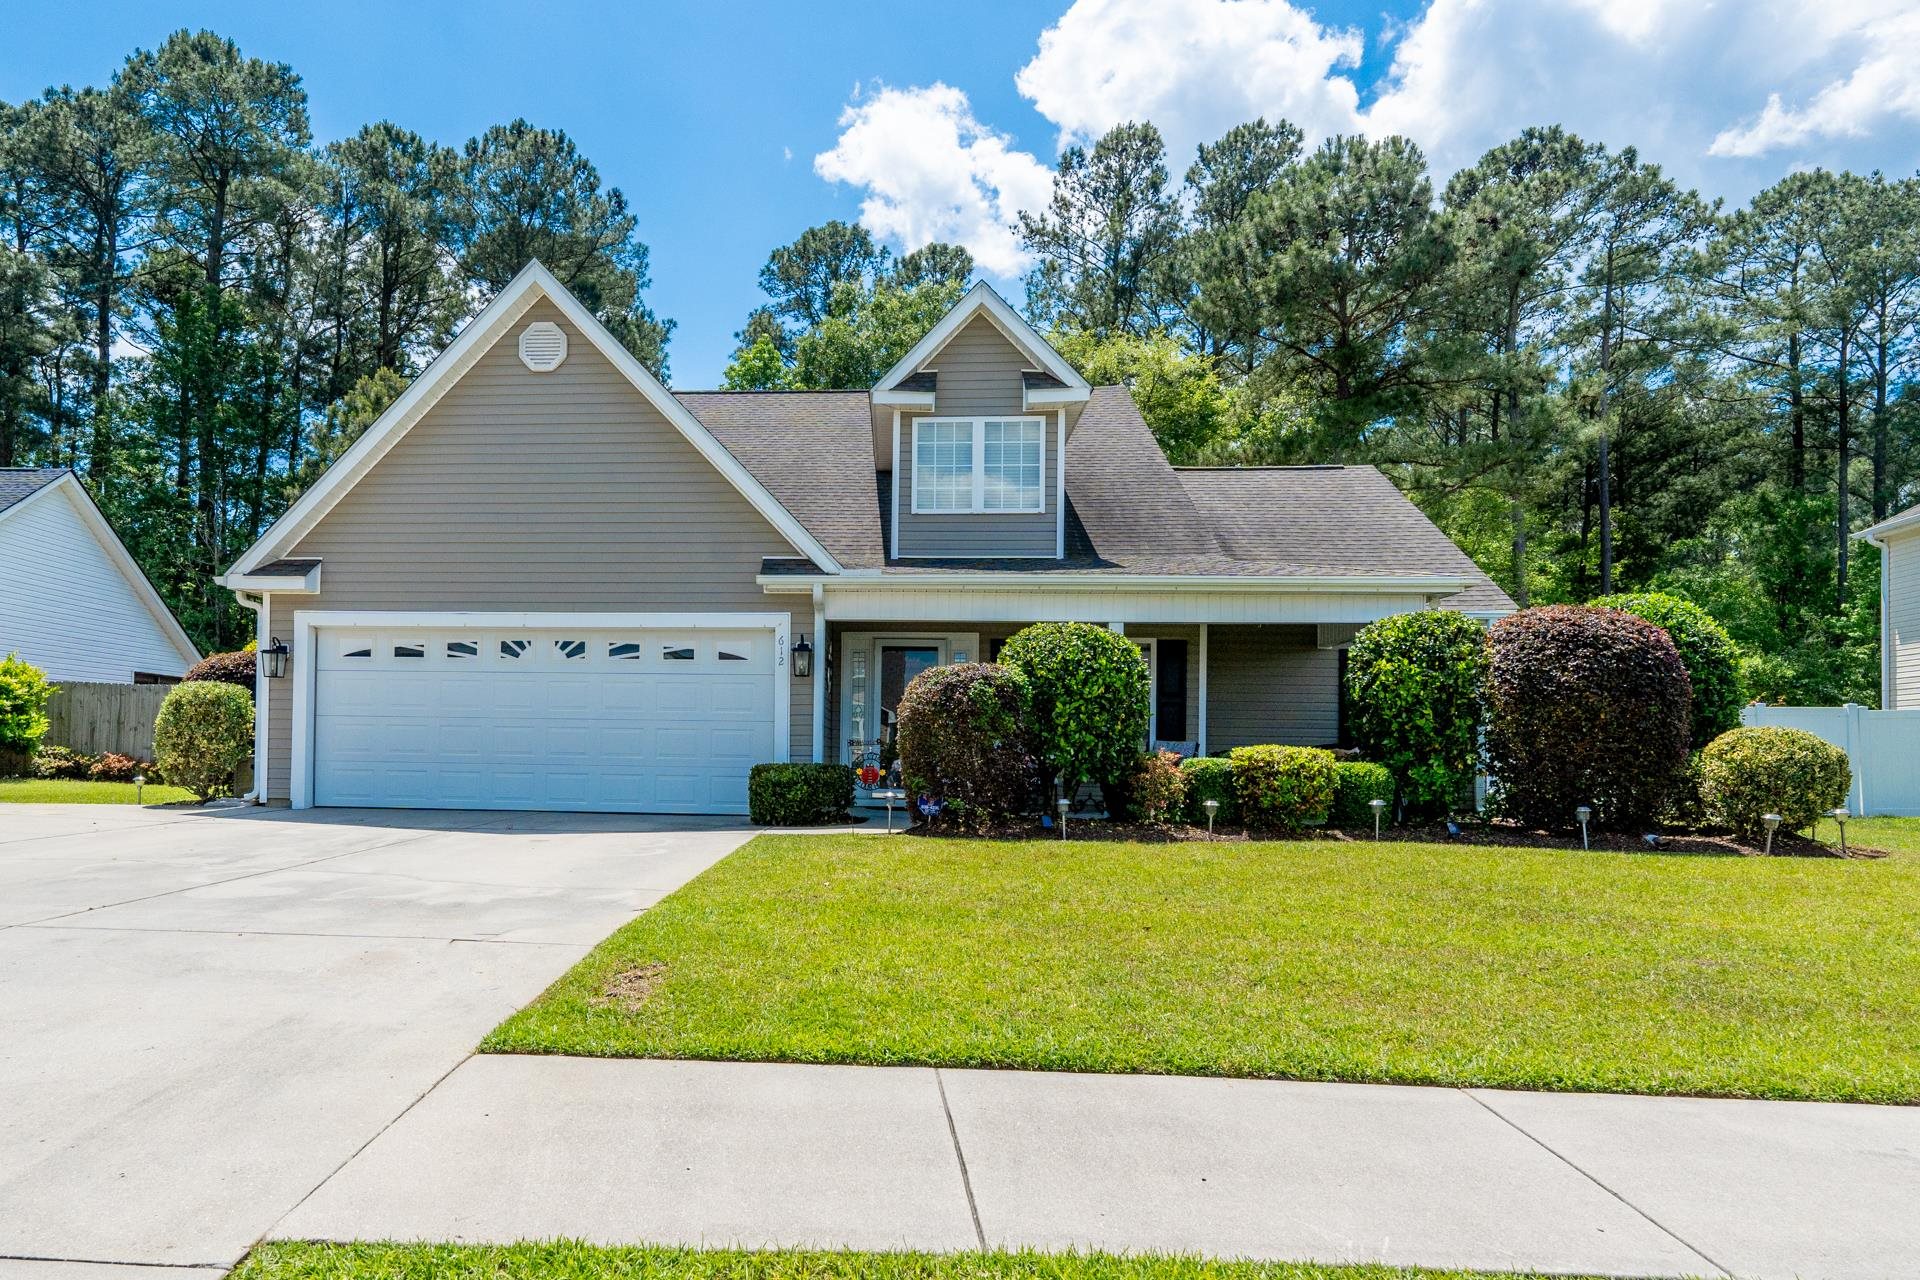 ***open house sat may 4th 1-3 & sun may 5th 12-3 pm*** introducing the newest listing in woodlyn meadows at 612 twinflower st. in little river, sc! this spacious home boasts 5 bedrooms, 3 full bathrooms, a big bonus room, and scenic water views from your low-country front porch. step into the cozy living room with high ceilings, lots of sunlight, beautiful hardwood floors, and more views of the lake. the updated kitchen is a chef's delight with a stylish new backsplash, two-toned cabinets, granite countertops, and a breakfast bar. on the first floor, you'll find 3 bedrooms including the primary bedroom with a large walk-in closet and ensuite bathroom featuring a double vanity, garden tub, and walk-in shower. upstairs, there are 2 more bedrooms, a bathroom, and a sizable bonus room. enjoy outdoor living on the screened porch or the patio, perfect for gatherings. the yard is landscaped and equipped with a sprinkler system. plus, there's plenty of storage in the walk-in attic and the oversized 2-car garage. with a new roof (2017) and a convenient location just a few miles from north myrtle beach, this home is a must-see! contact your realtor today to schedule a showing!